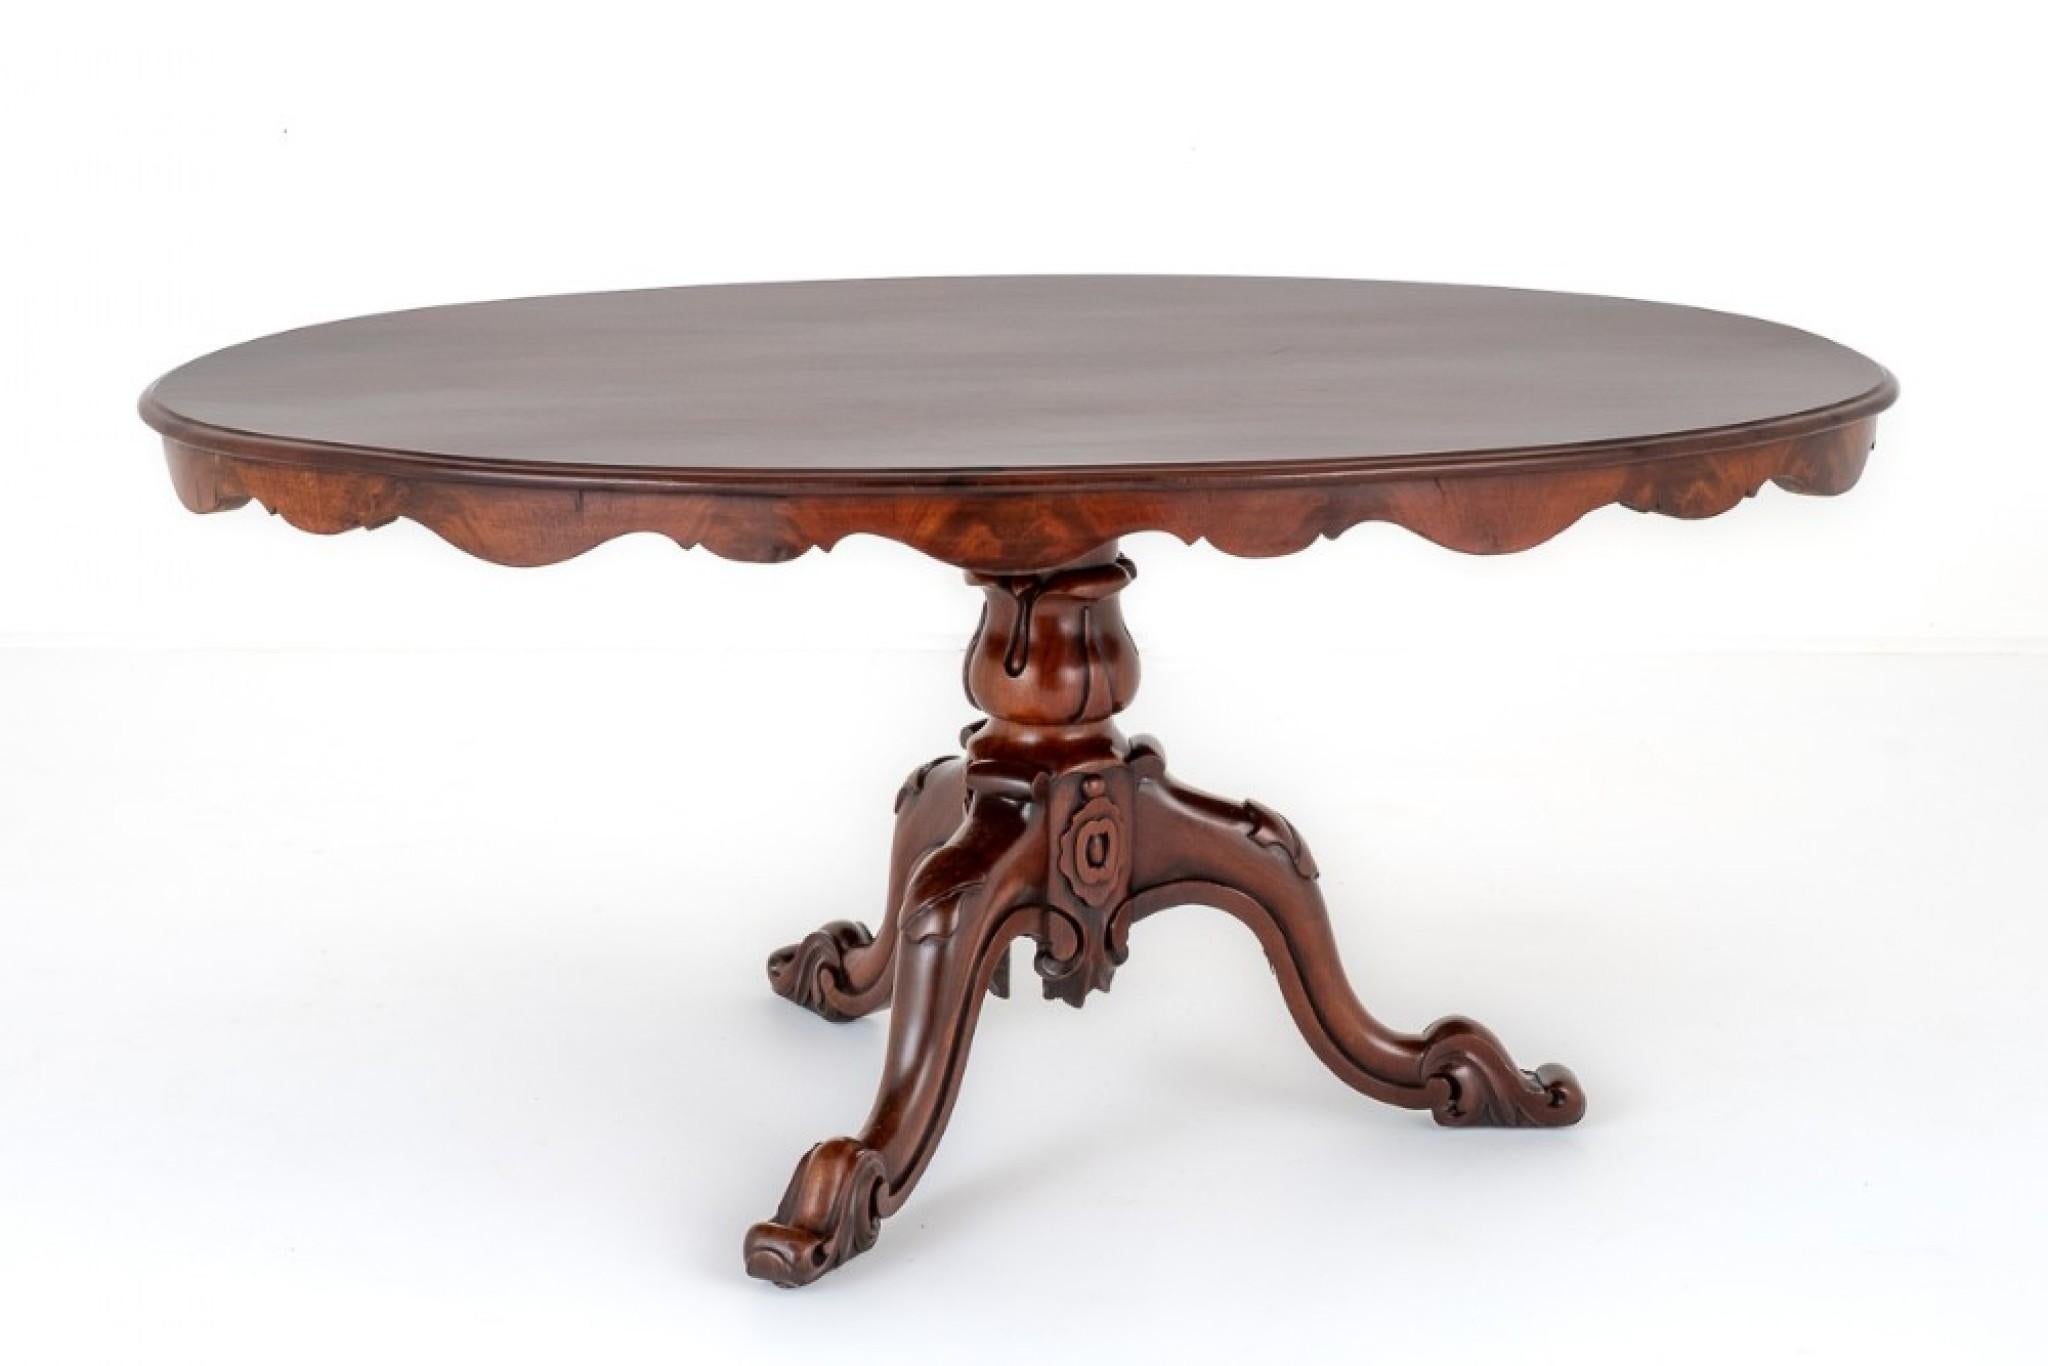 Early Victorian mahogany oval centre or breakfast table.
circa 1850
The Top of The Table Featuring a Shaped Frieze and Thumb Mould.
The Table Stands Upon a Well Designed Base with 3 Shaped legs, Carved Toes, Carved Knees and a Ring Turned Carved